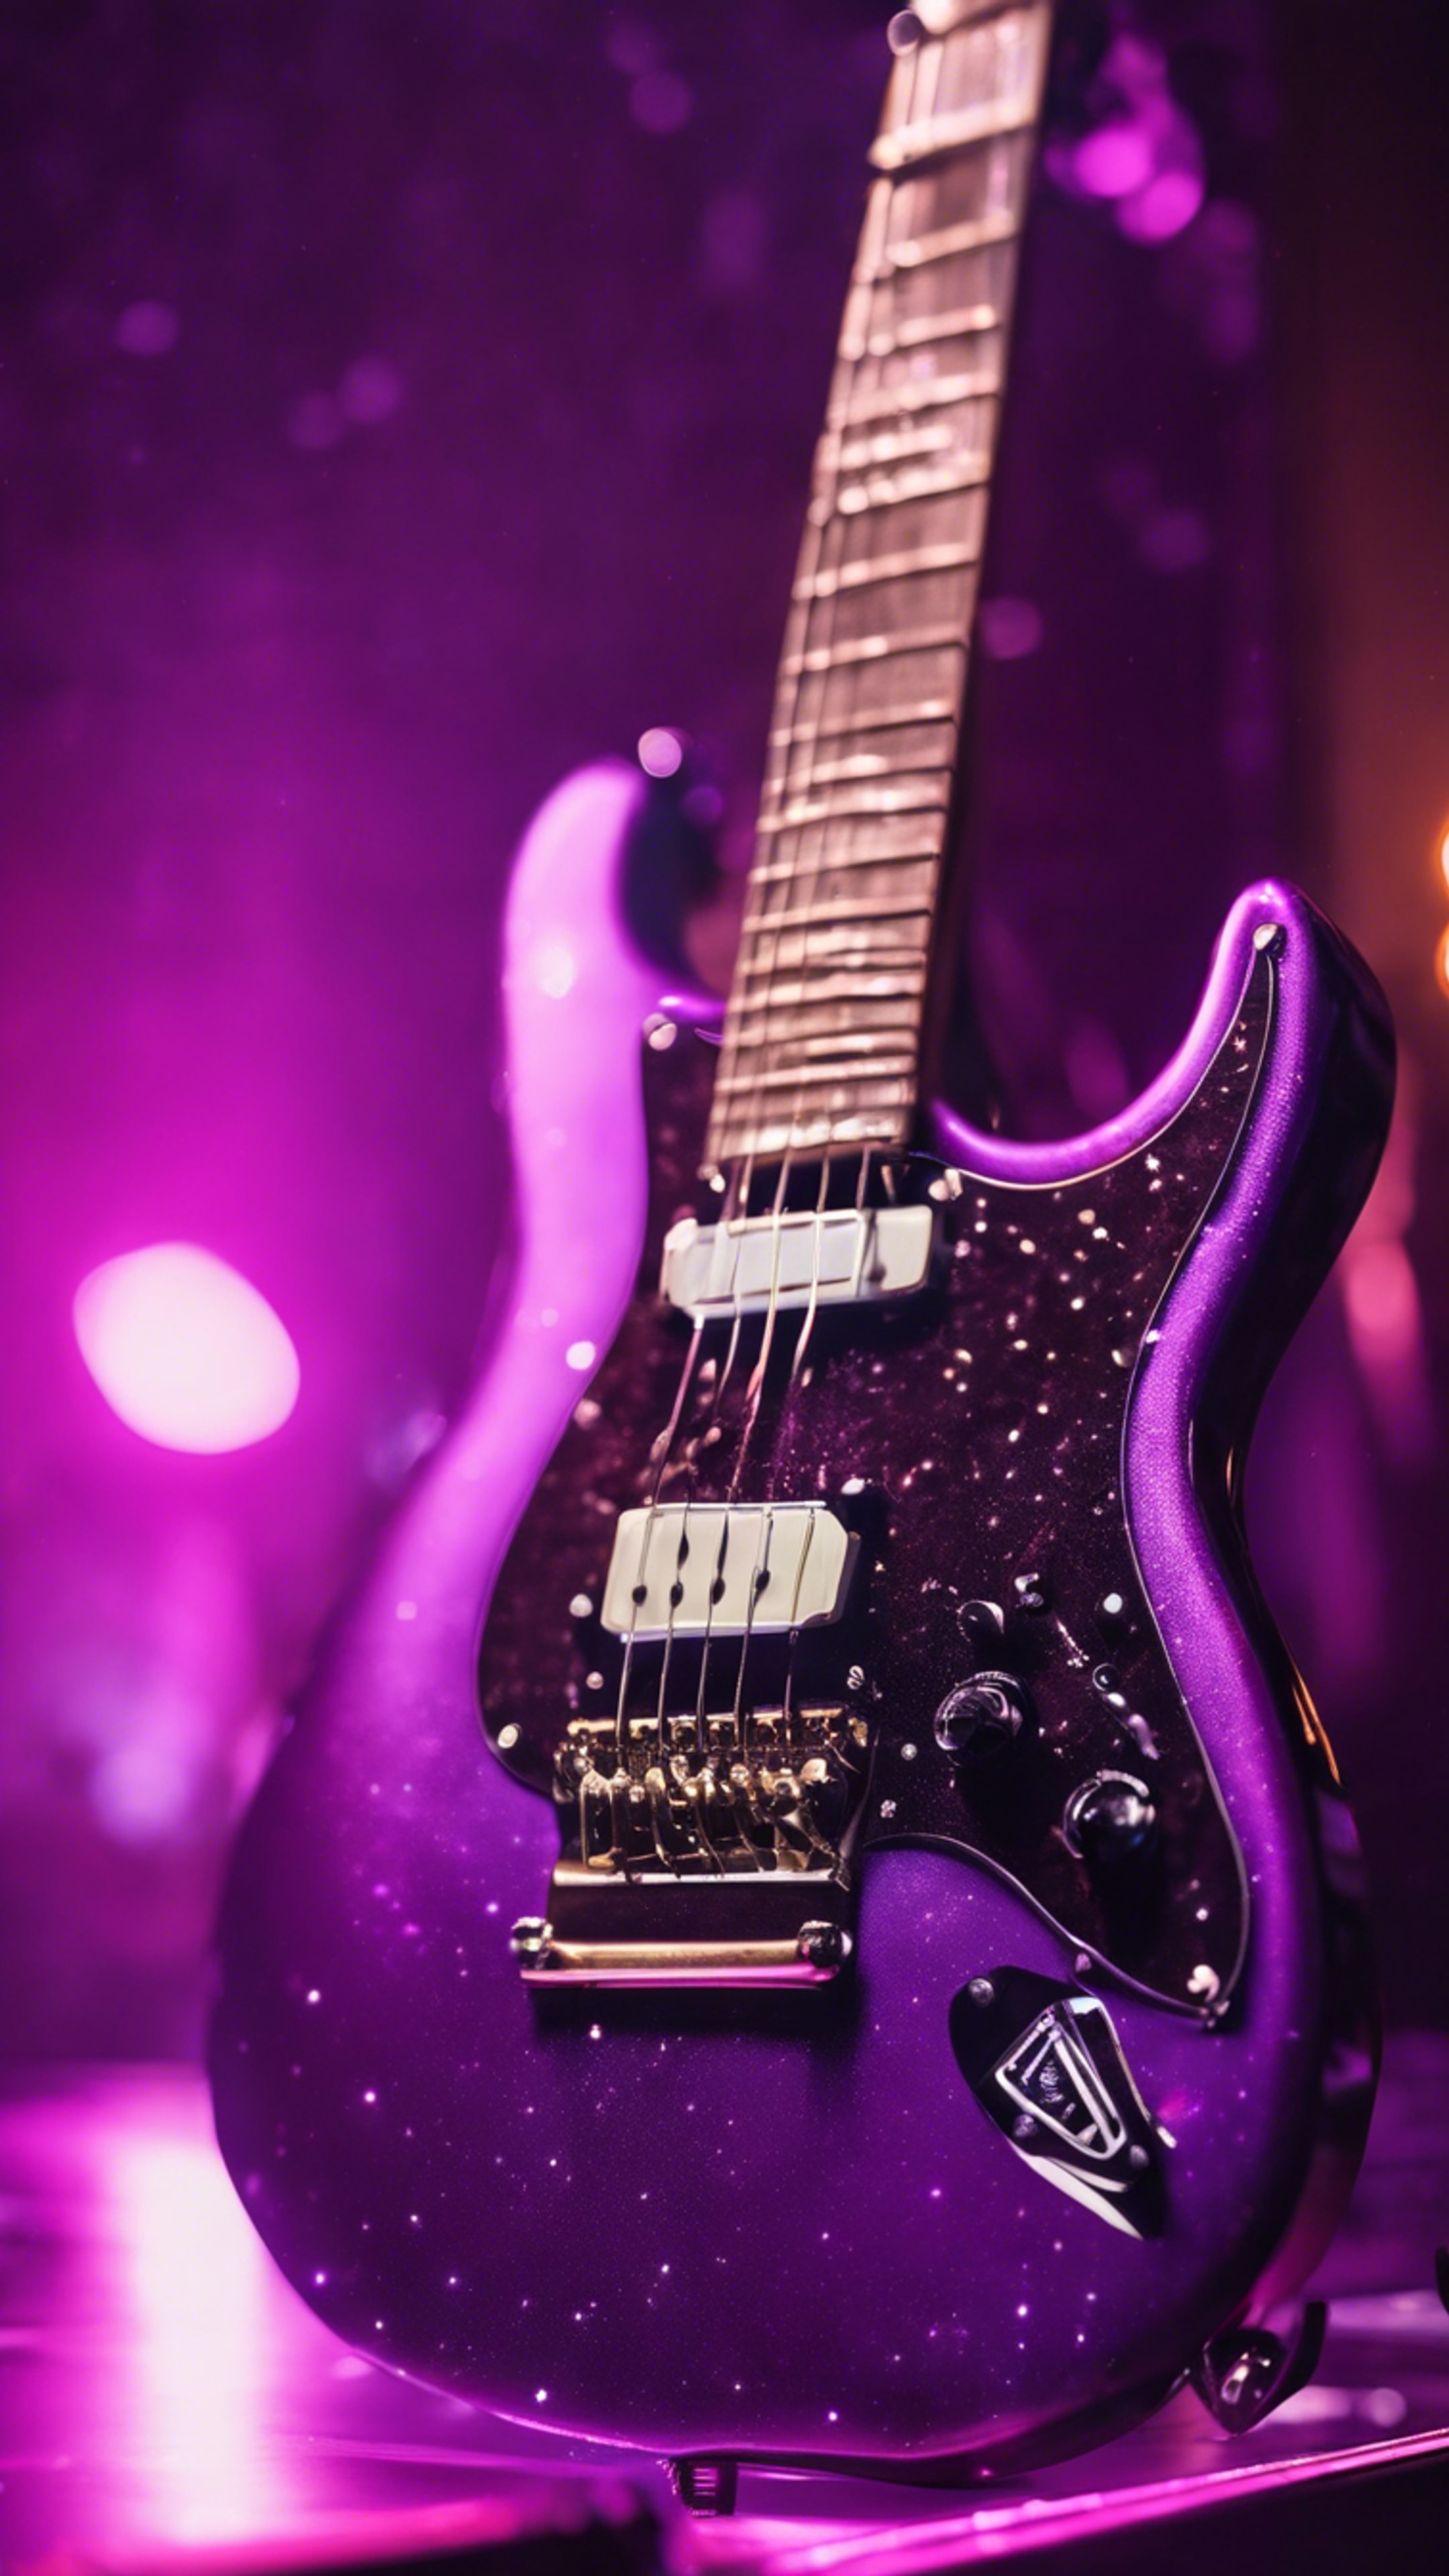 An electric guitar, finished in a glossy neon purple, under the cool stage lights of a concert. duvar kağıdı[e32ffa723fc740a5910d]